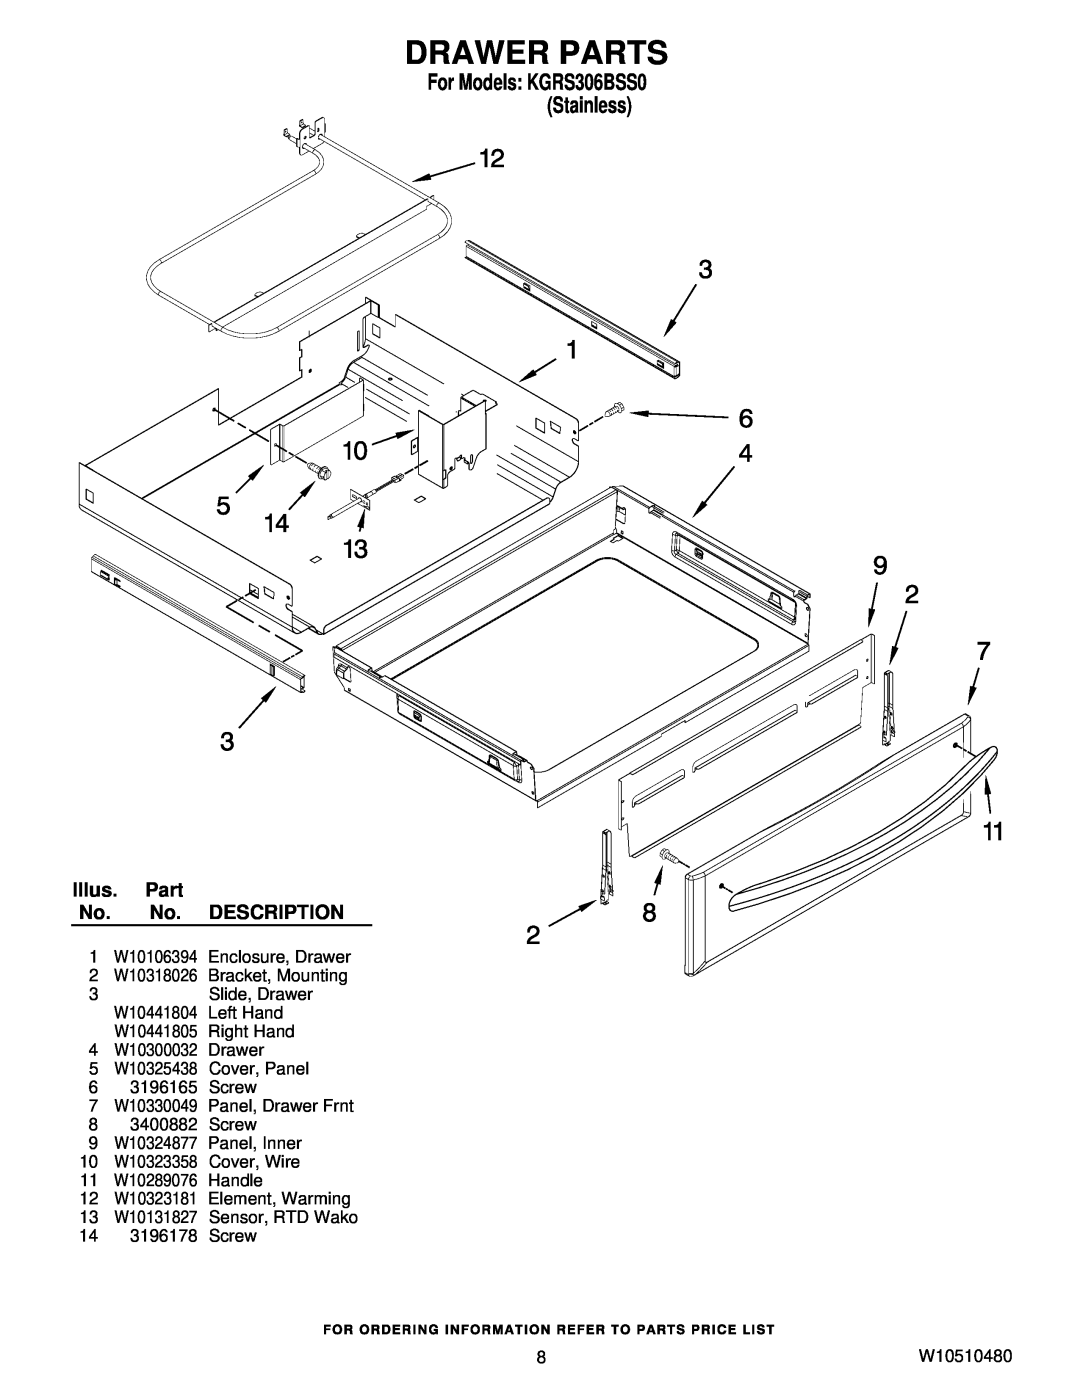 KitchenAid installation instructions Drawer Parts, Illus. Part No. No. DESCRIPTION, For Models KGRS306BSS0 Stainless 